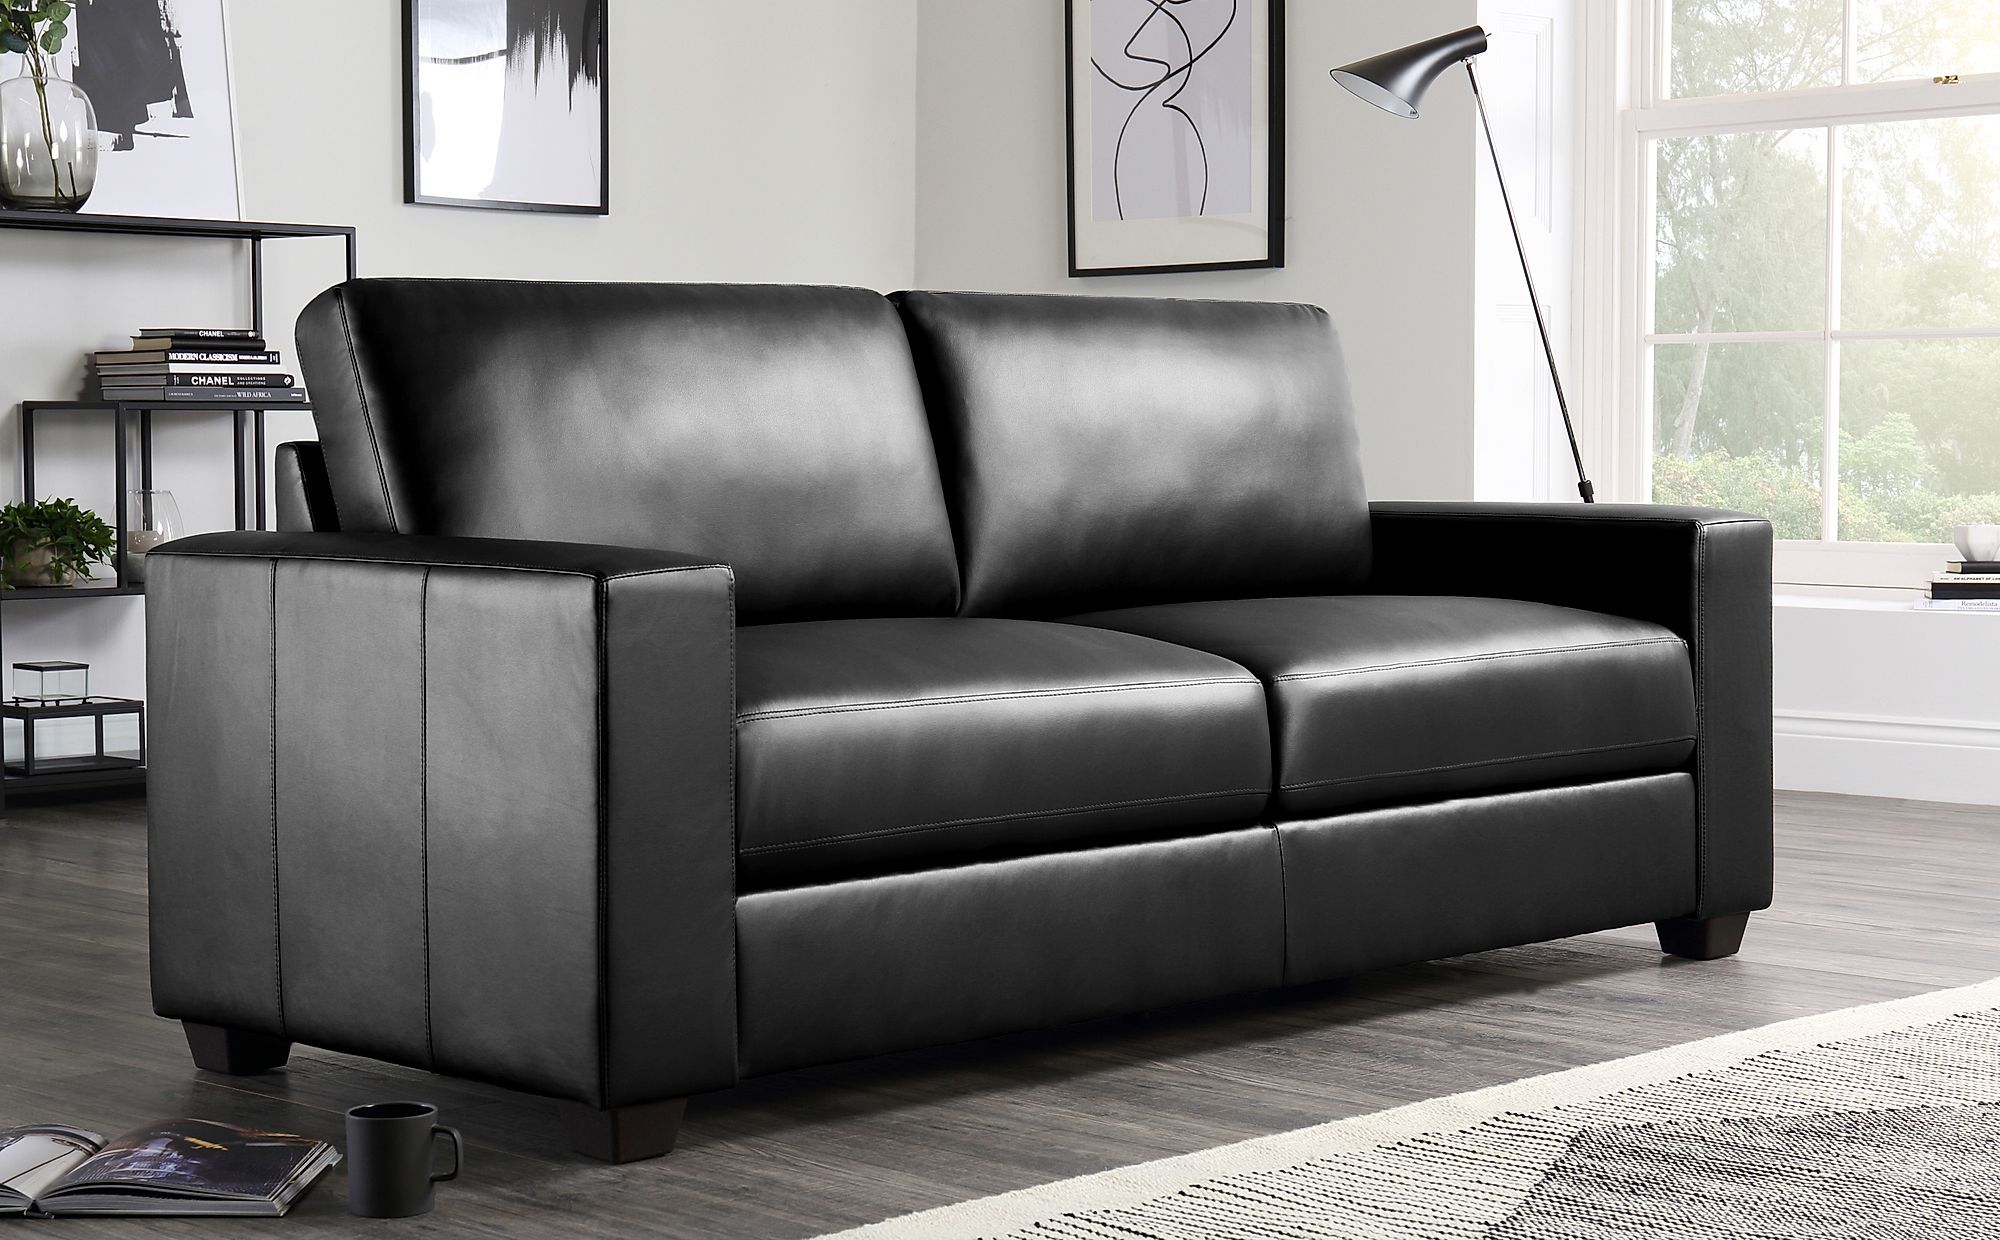 Mission Black Leather 3 Seater Sofa | Furniture Choice Inside 3 Seat L Shaped Sofas In Black (Gallery 10 of 20)